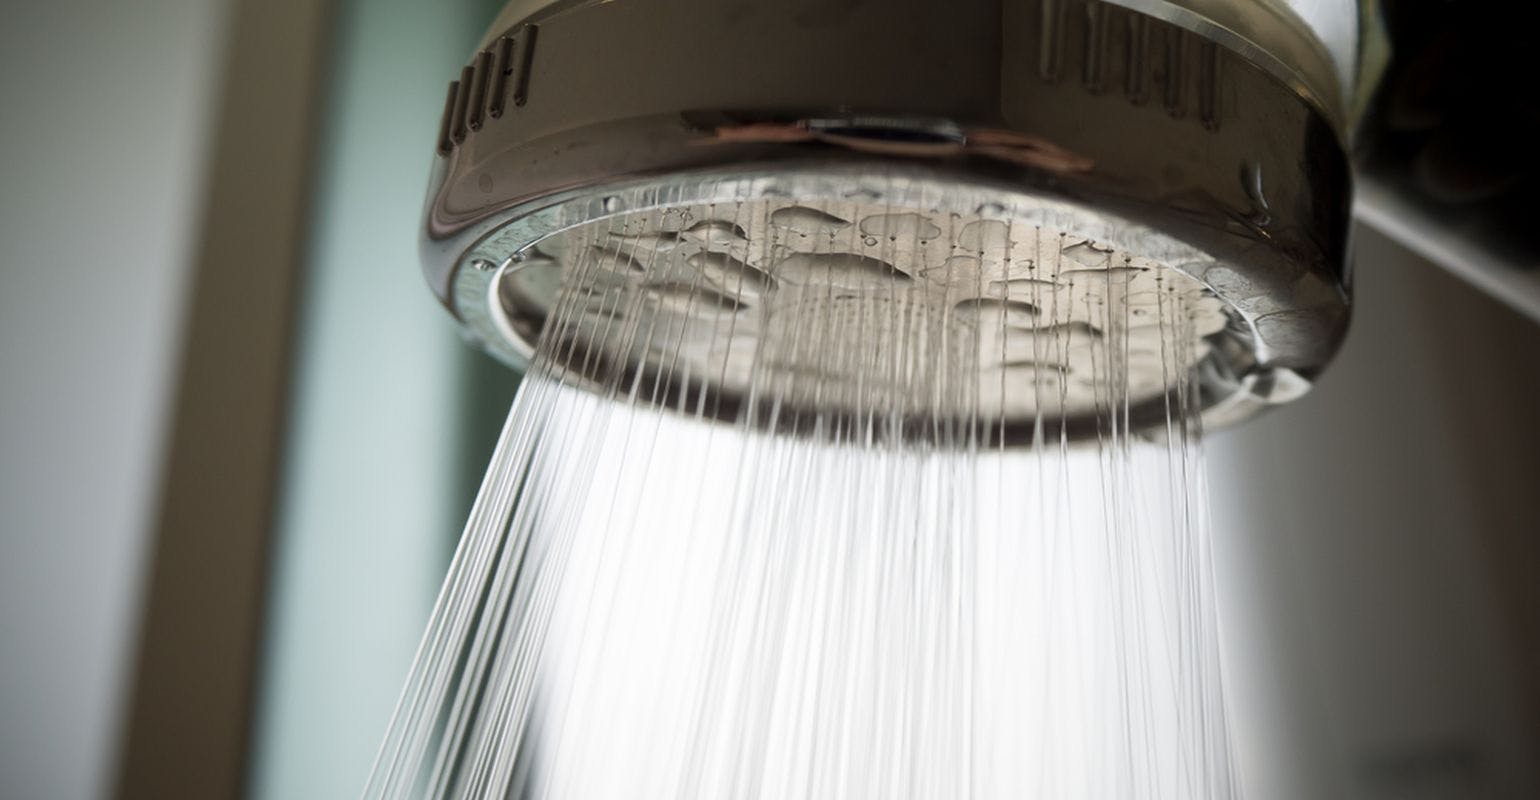 Researchers Find Correlation Between Showerhead Bacteria and Lung Infections